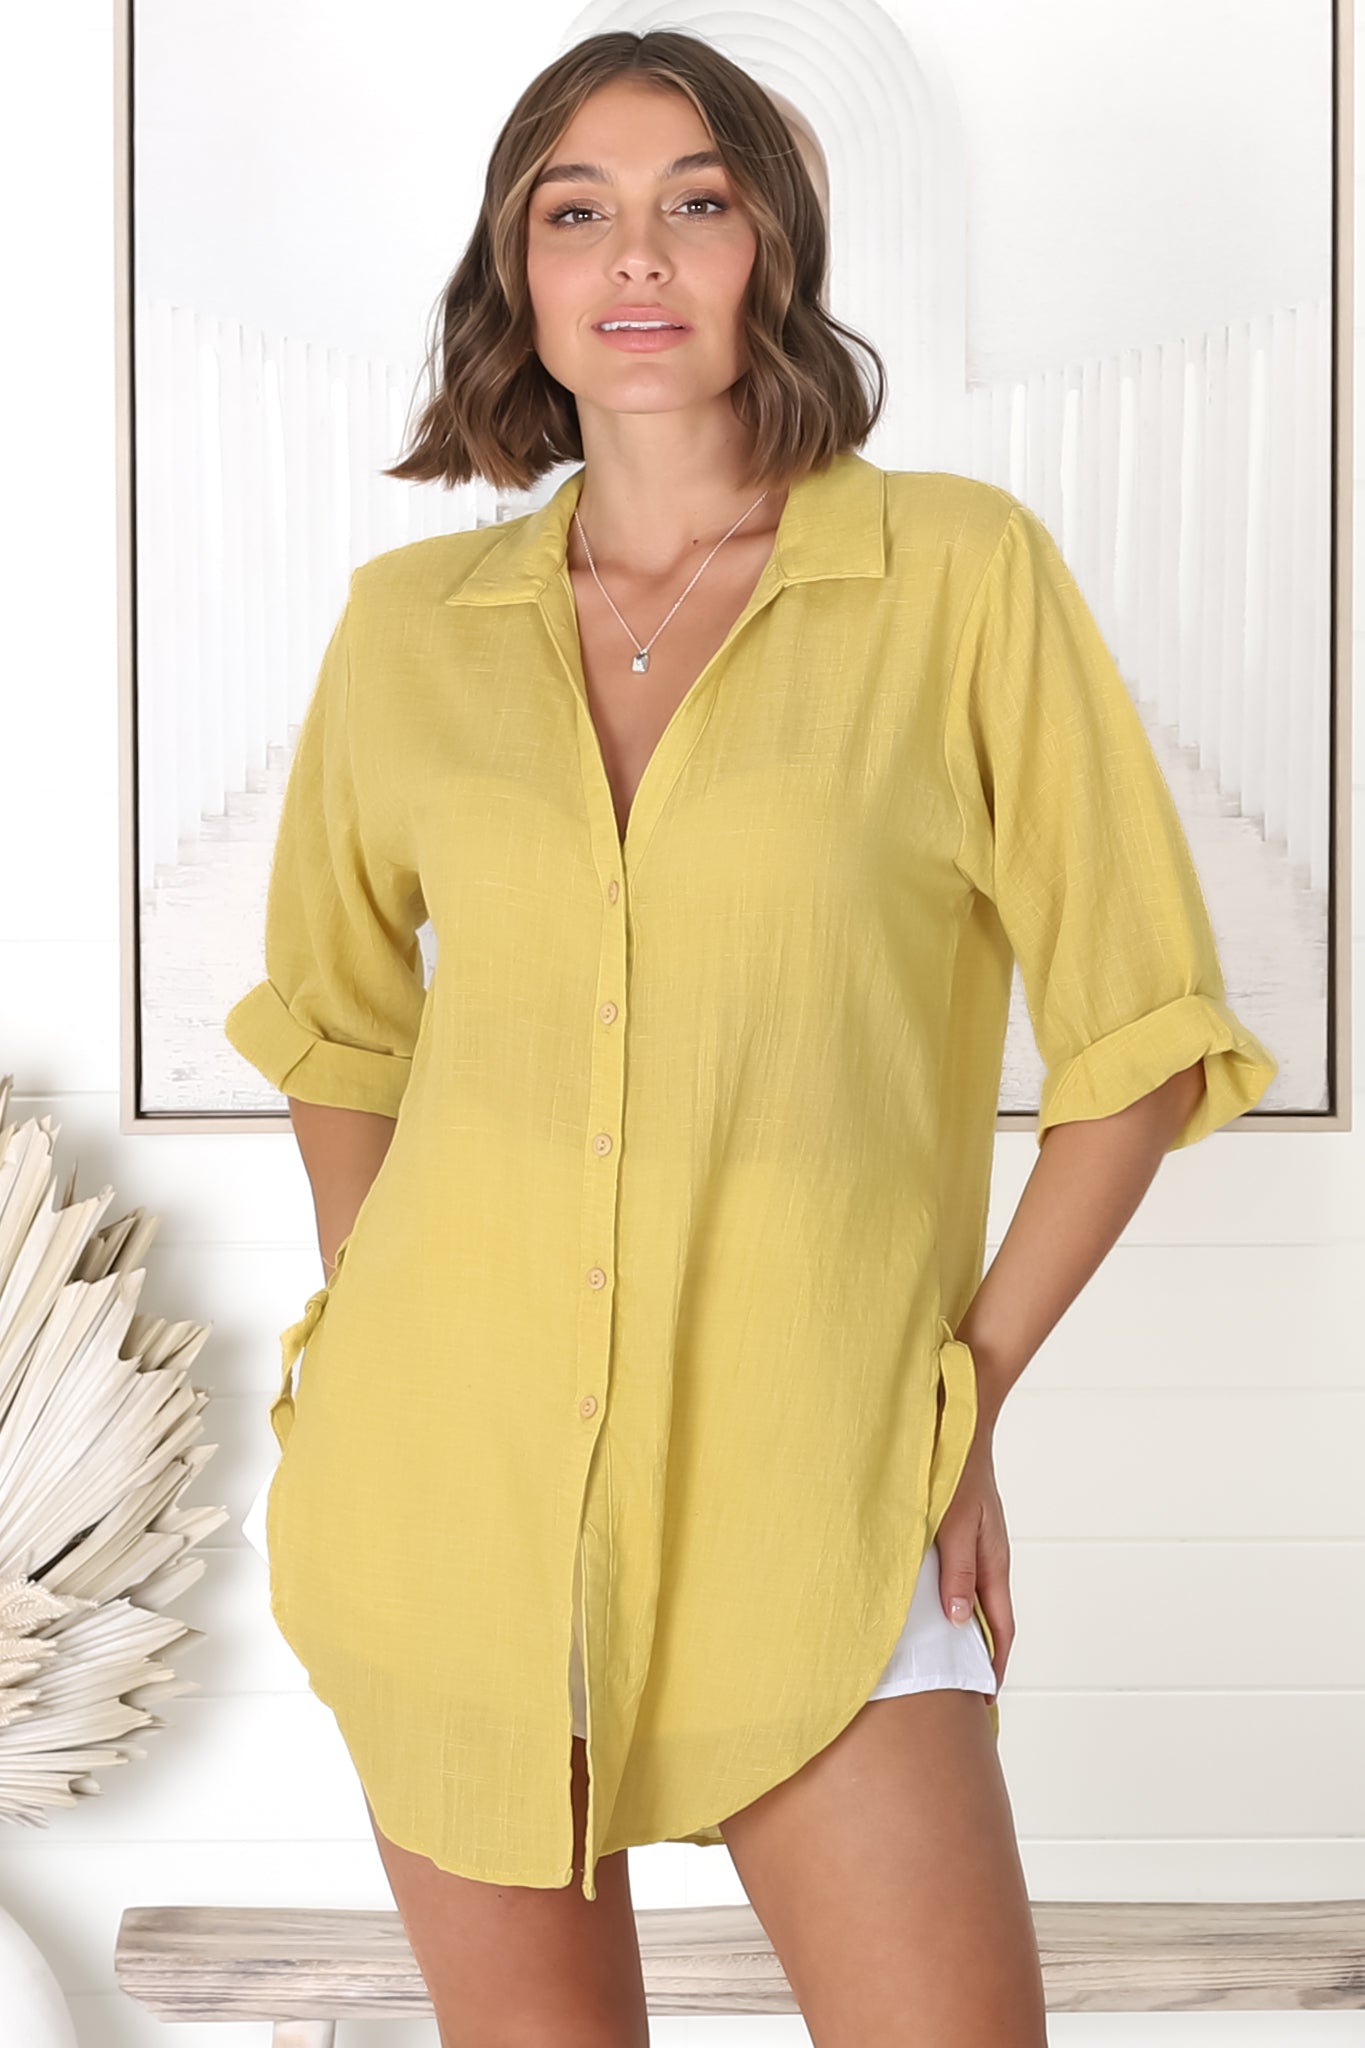 Beachly Shirt - Folded Collar Button Down Relaxed Shirt In Mustard